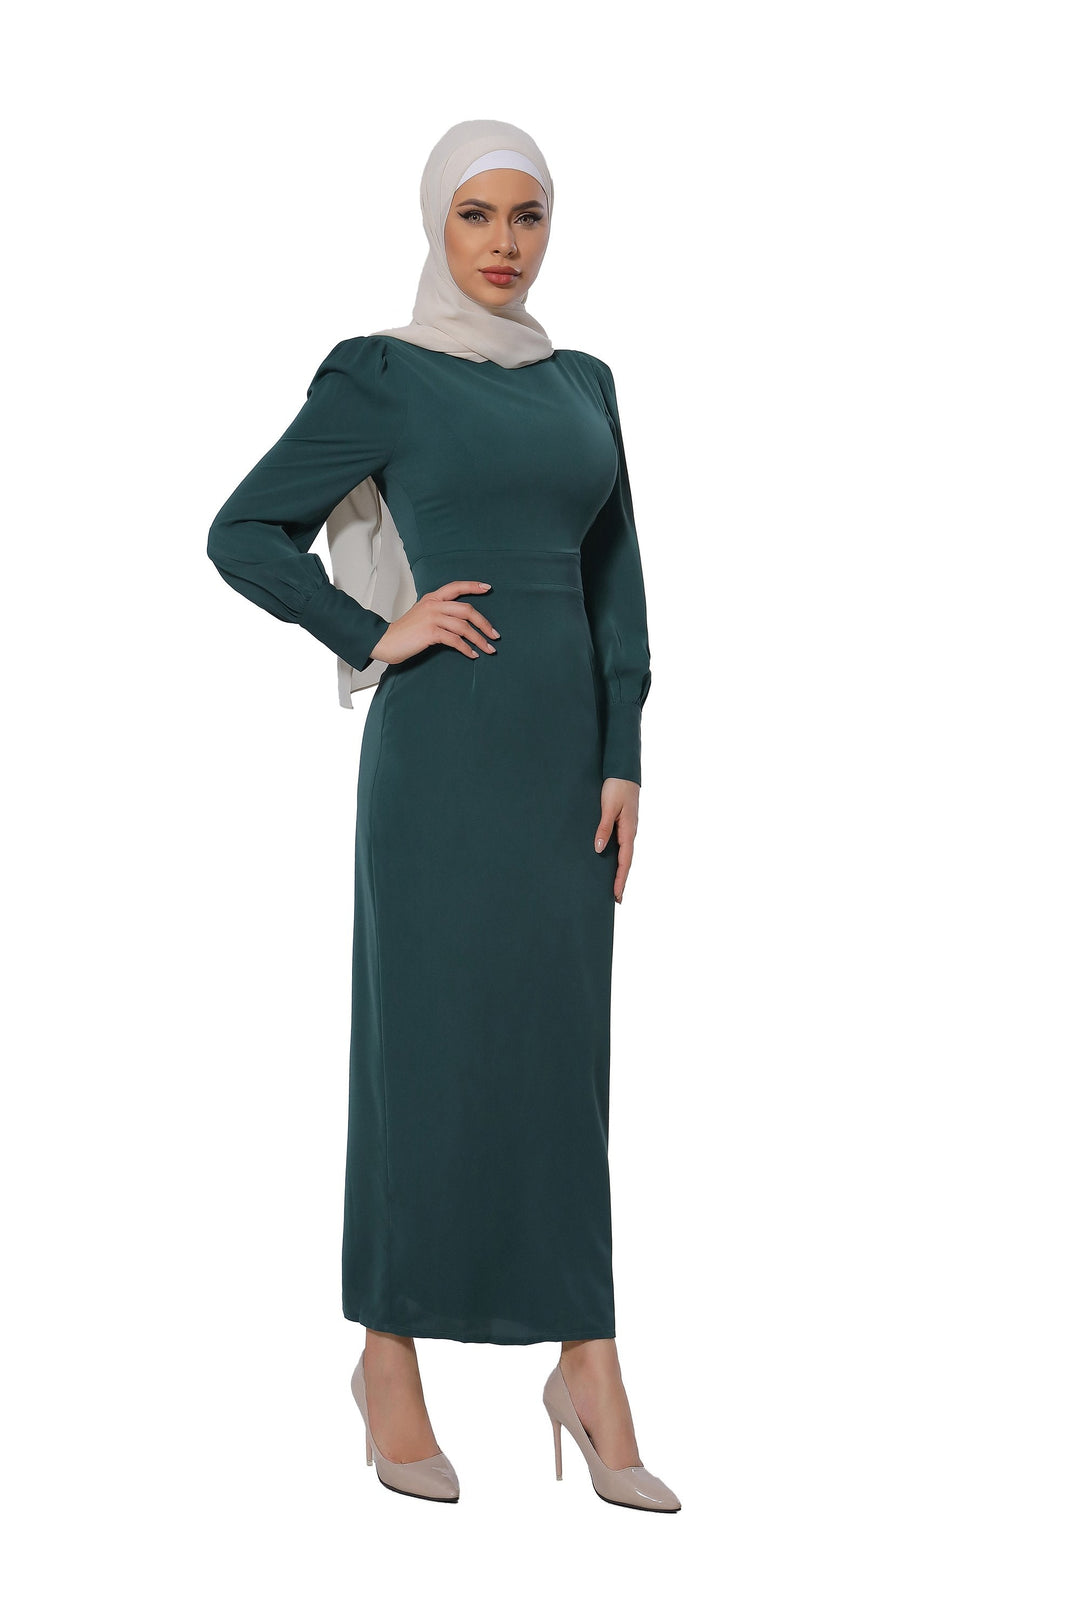 Urban Modesty - Teal Perfectly Pencil Maxi Dress-CLEARANCE